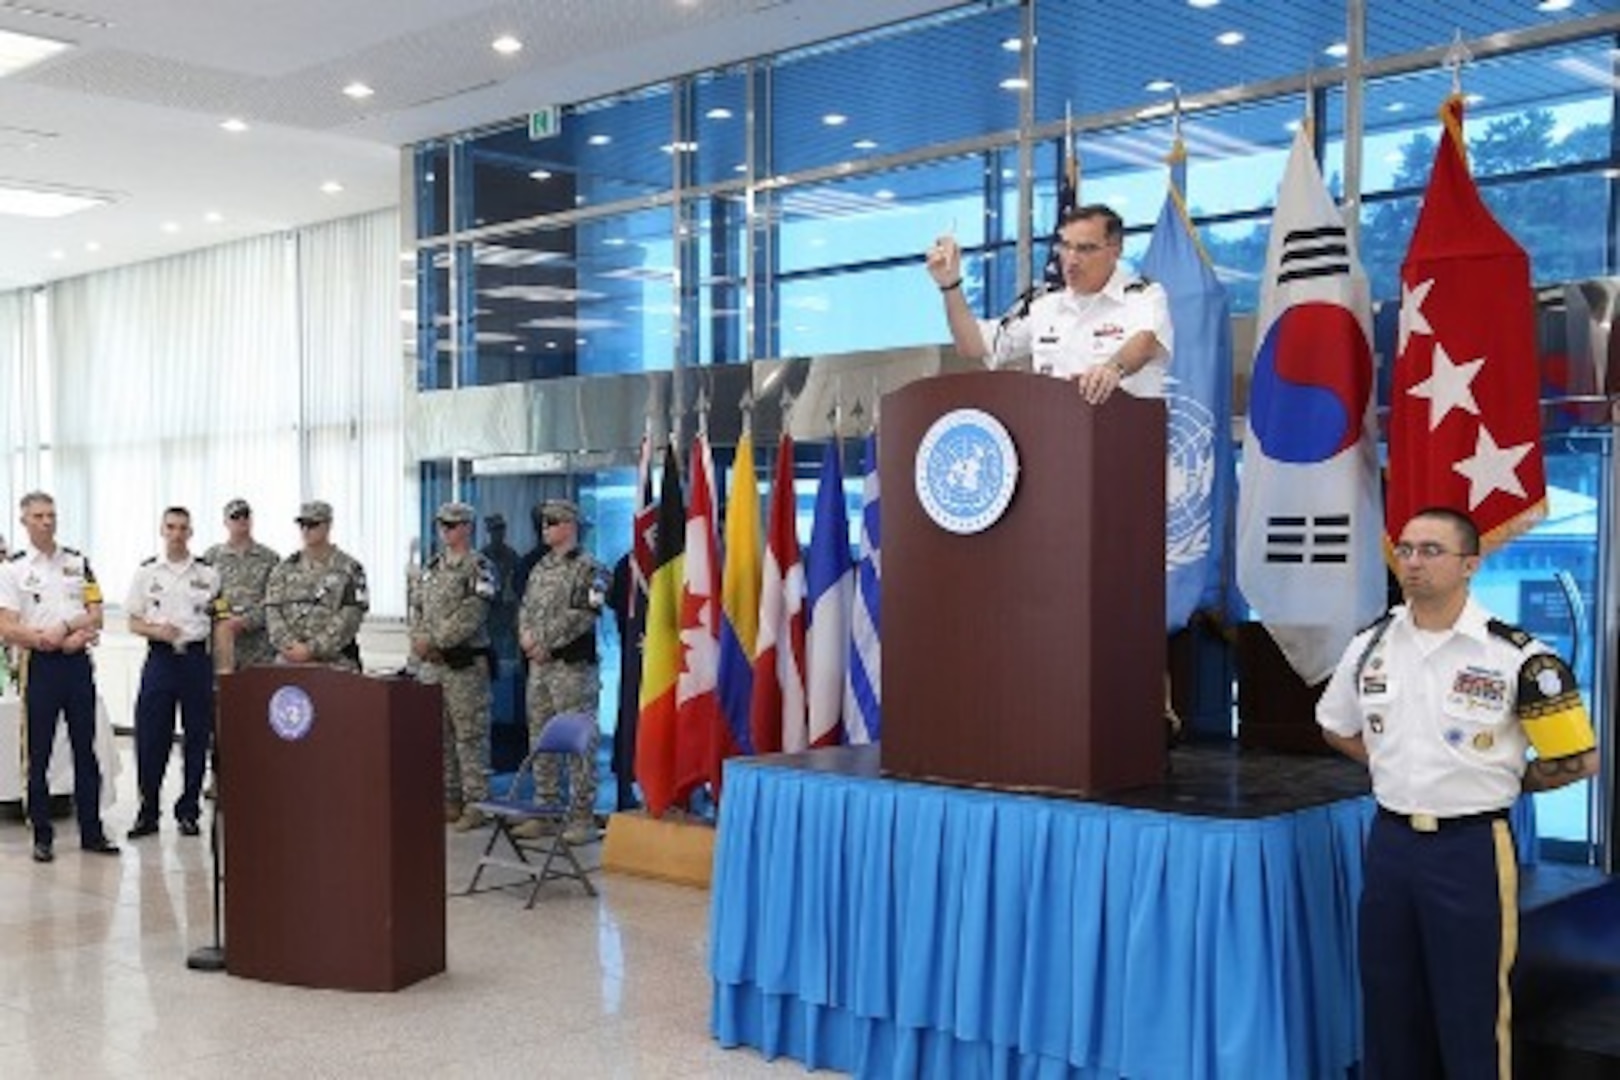 PANMUNJOM, South Korea -- Gen. Curtis M. Scaparrotti, Commanding Gen. United Nations Command/Combined Forces Command/United States Forces Korea, gives a speech at the Freedom House located in South Korea’s Joint Security Area commemorating the 61st anniversary of the Korean armistice. (U.S. Army photo by Sgt. Russell Youmans, USFK Command Photographer) 